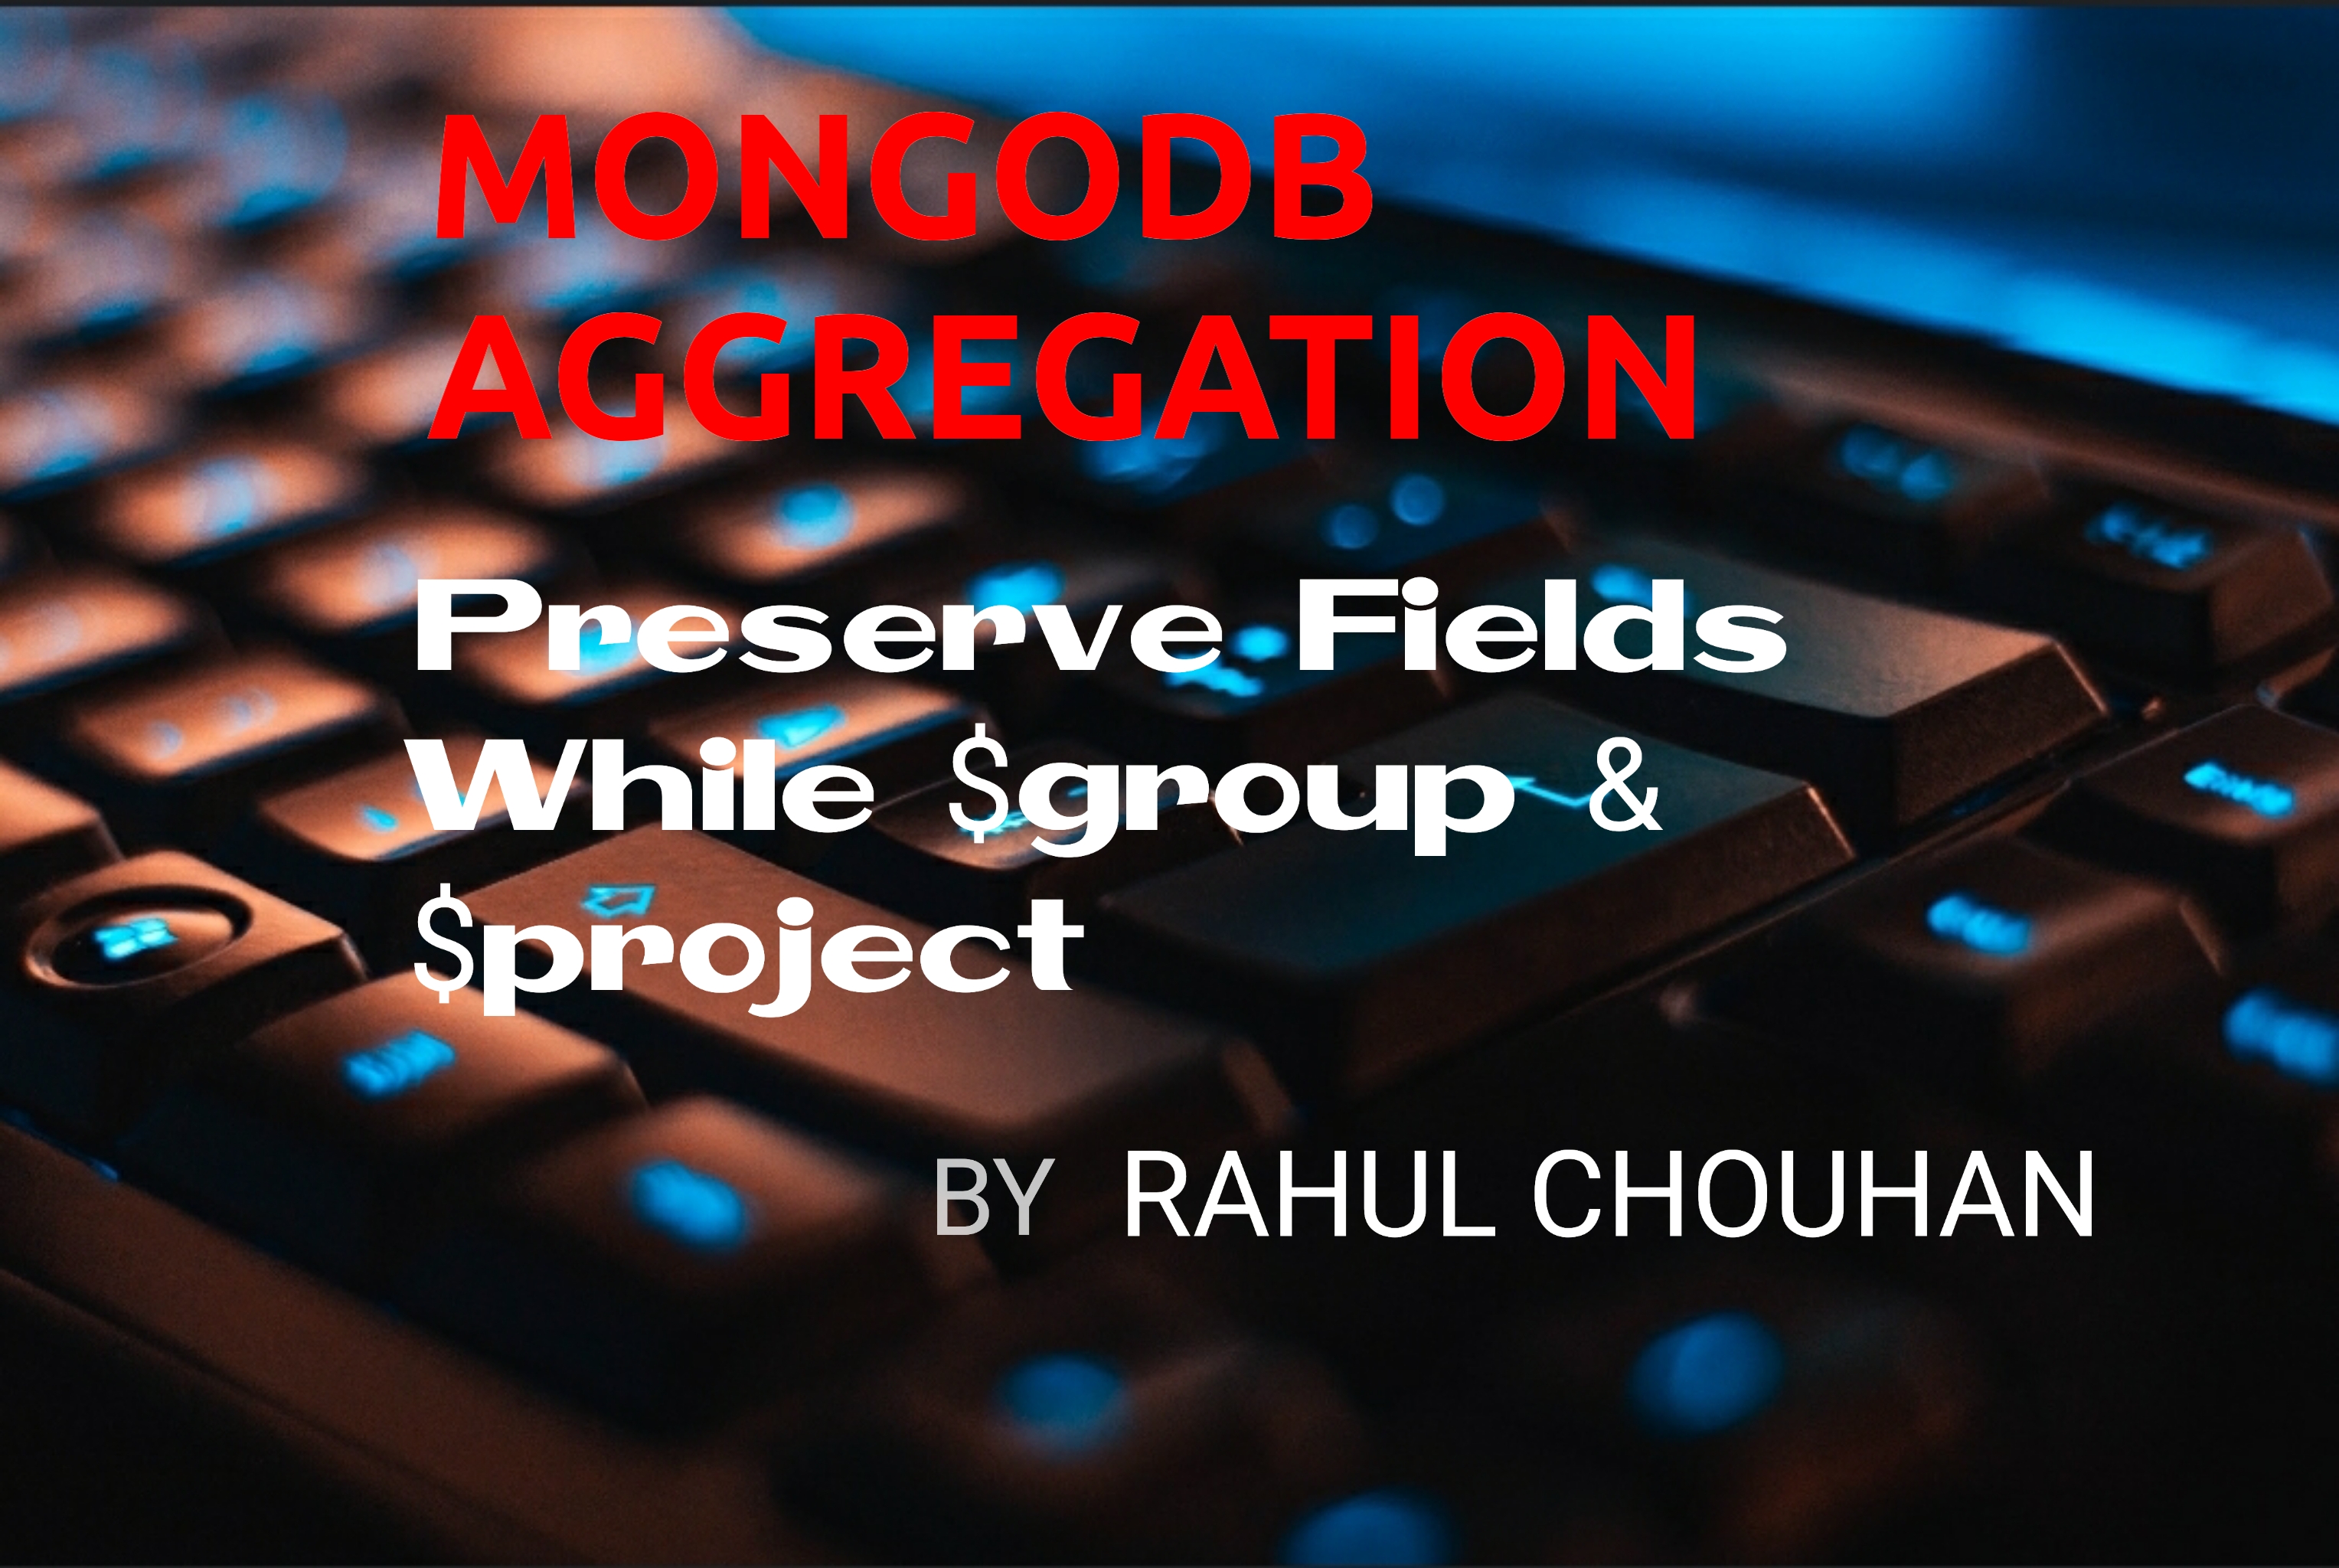 Article on MongoDB aggregate query